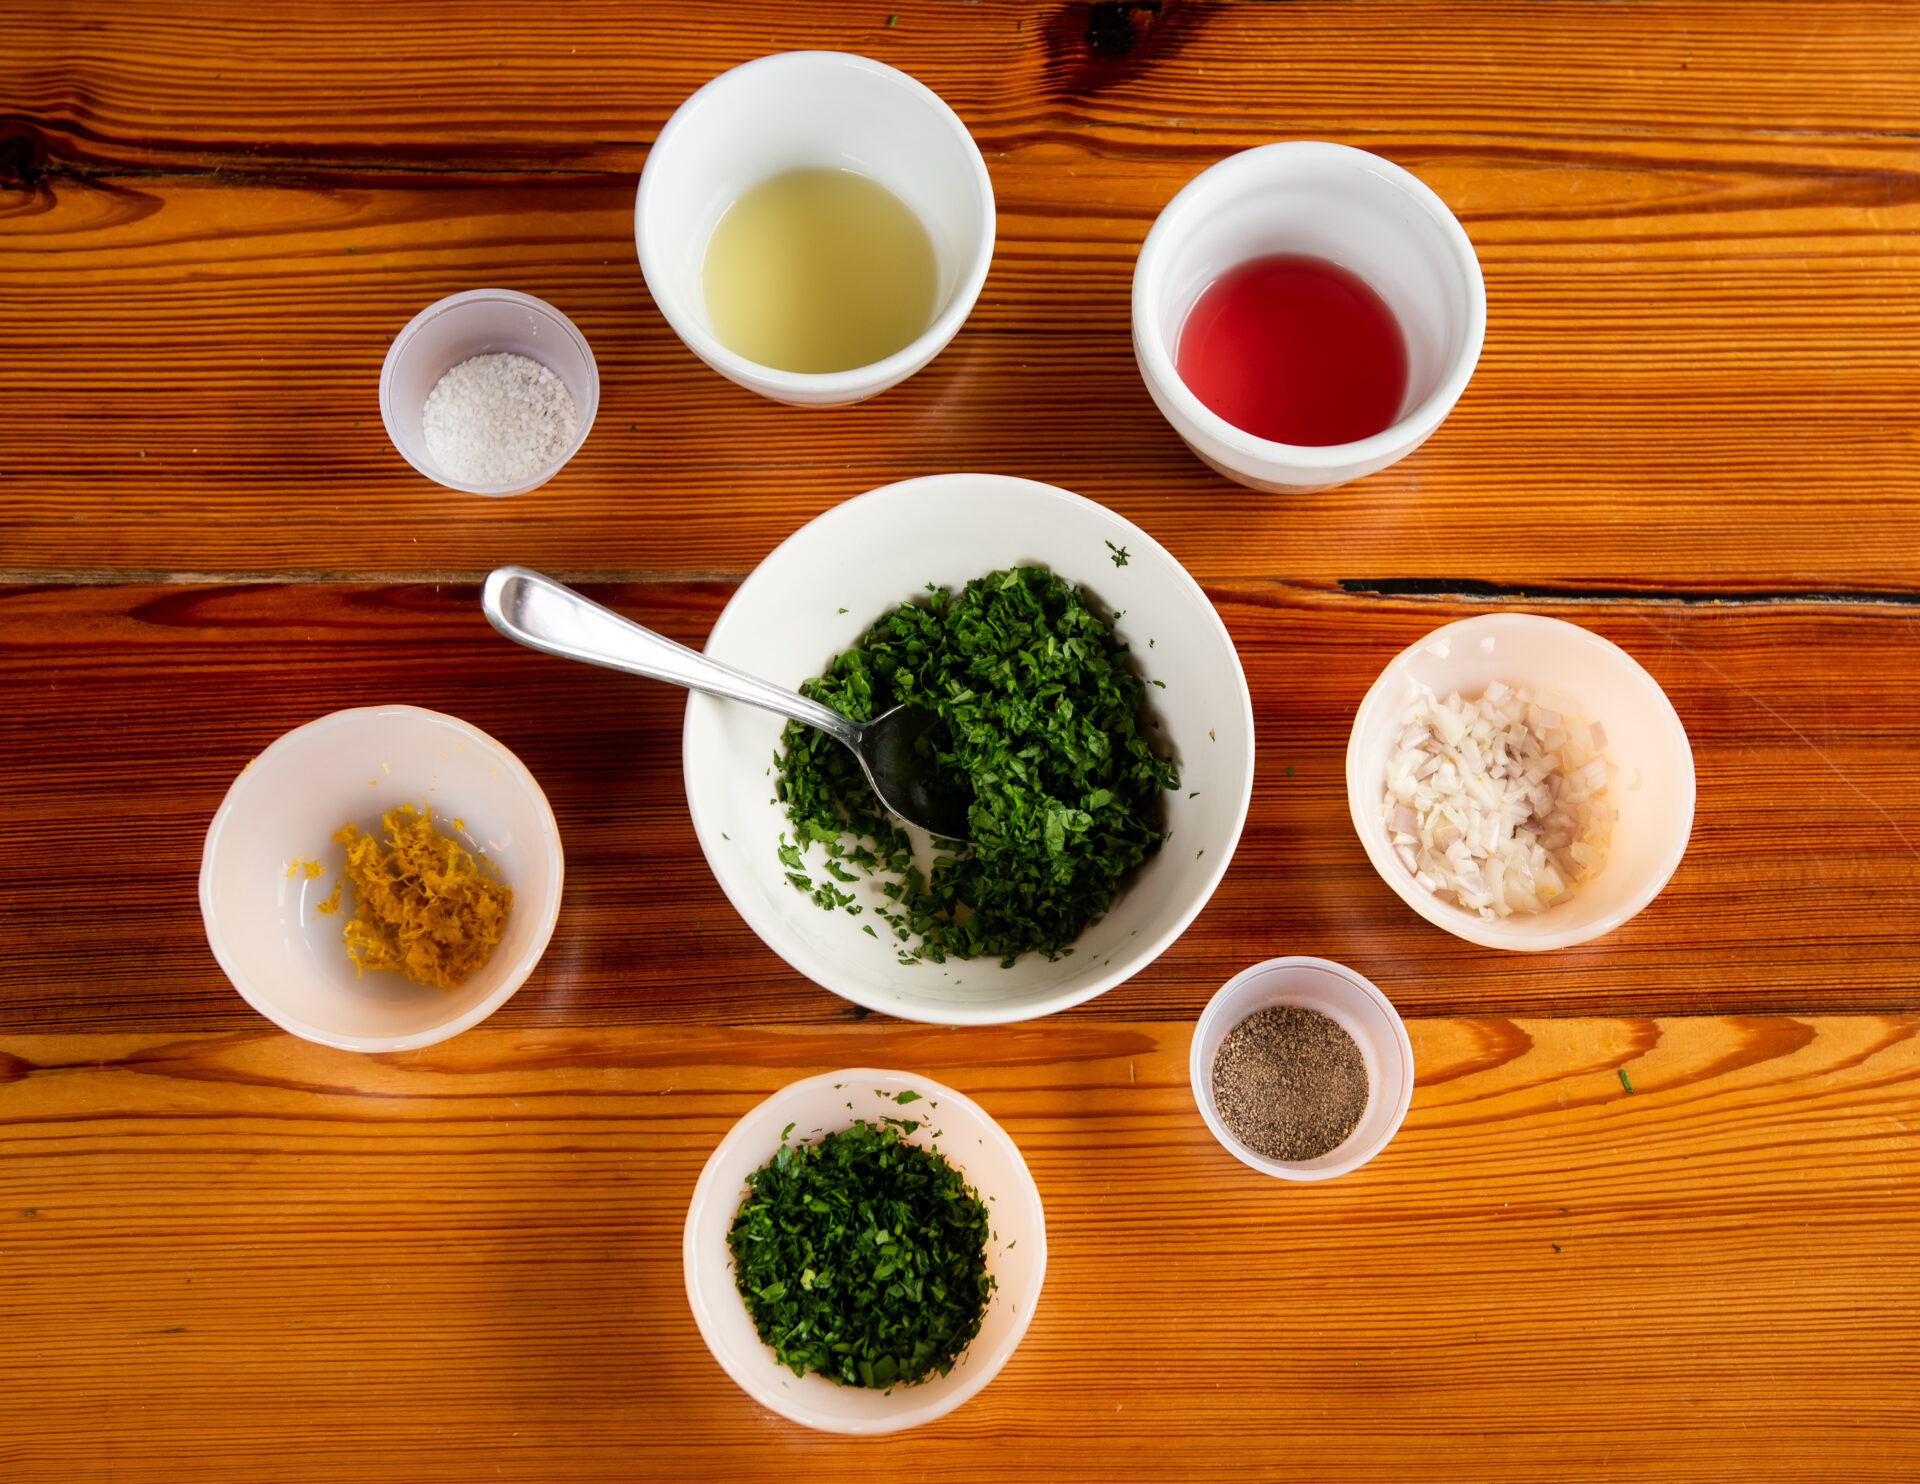 All the ingredients to make gremolata